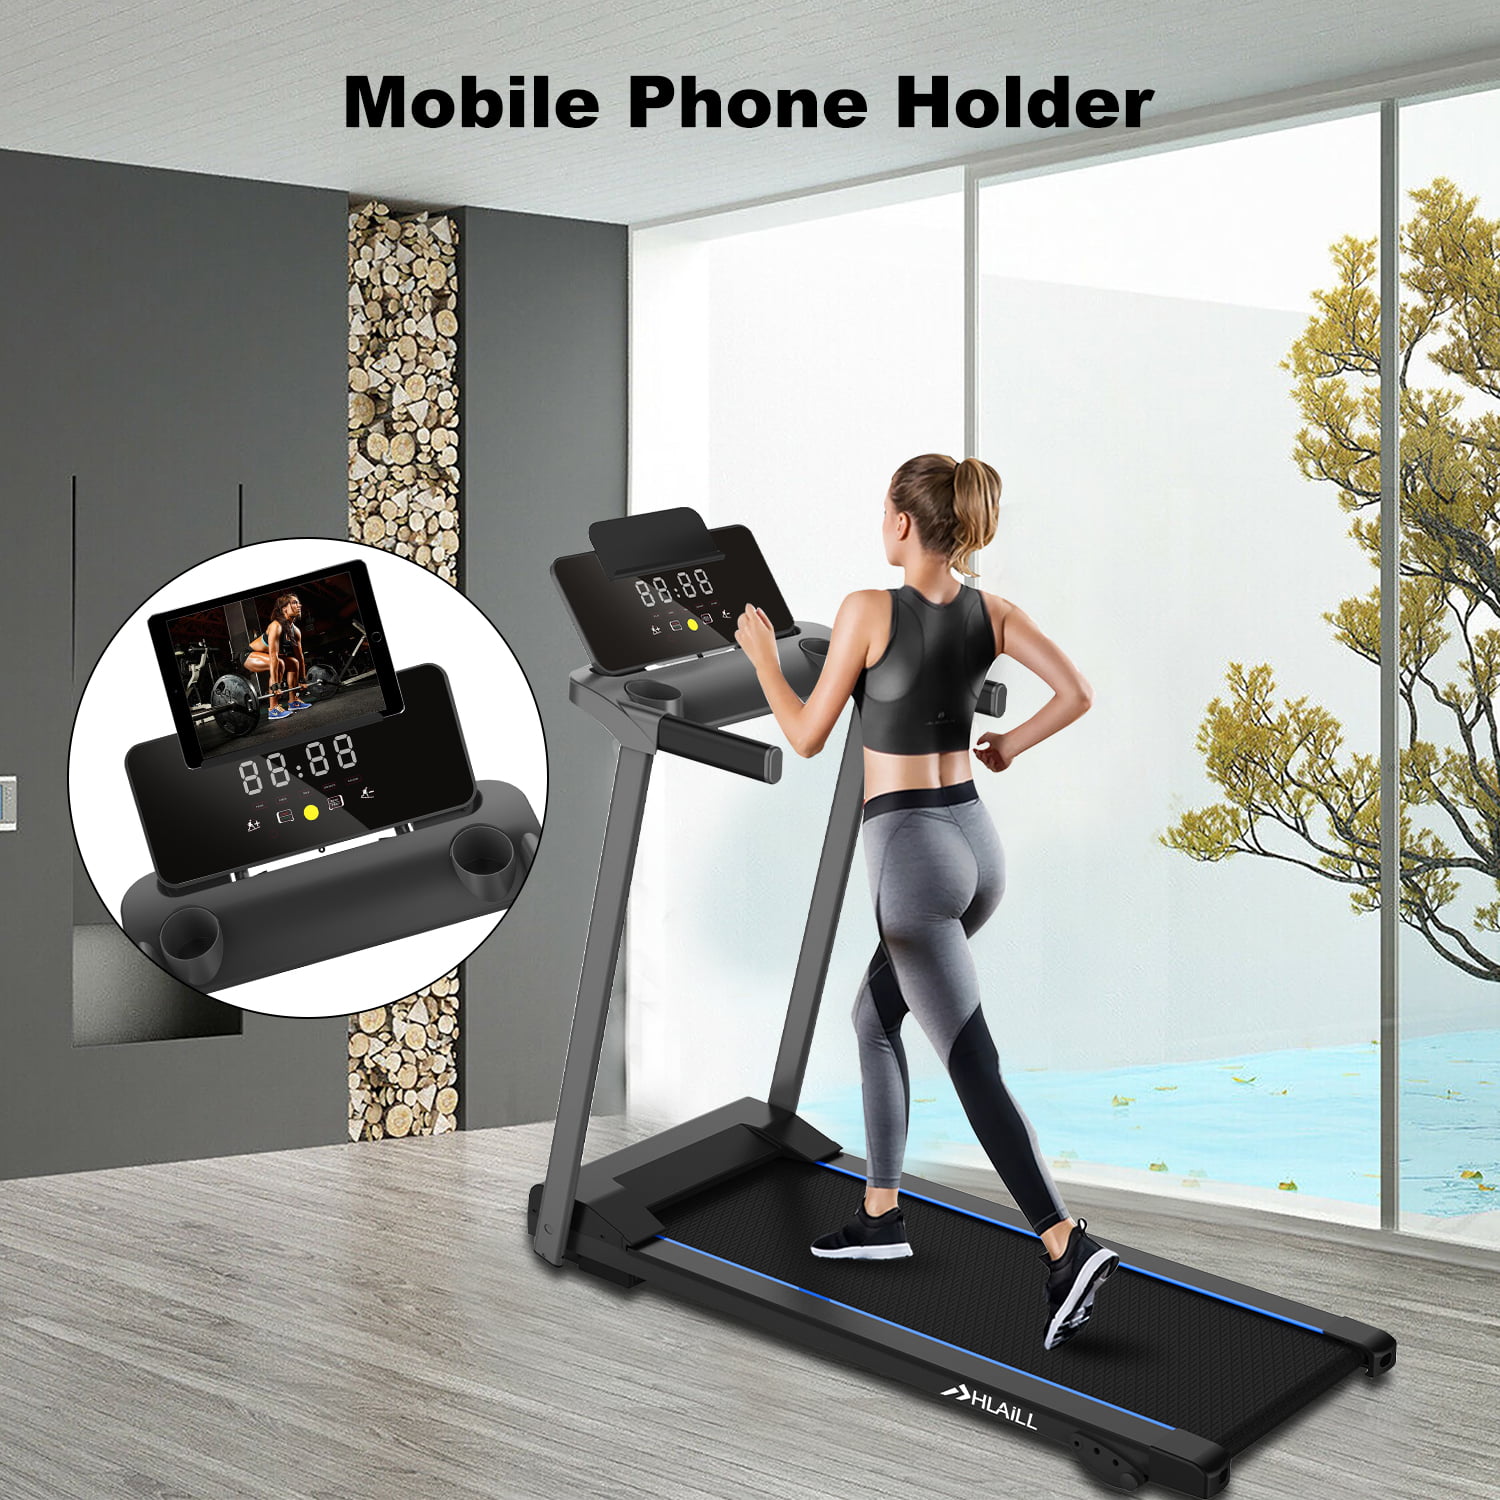 Manual Treadmills Running Belt Machine Digital Mechanical Jogging Walking Exercise Machine with LED Display for Home Gym Cardio Fitness Equipment Yinguo 3in1 Multifunctional Folding Incline Treadmill 